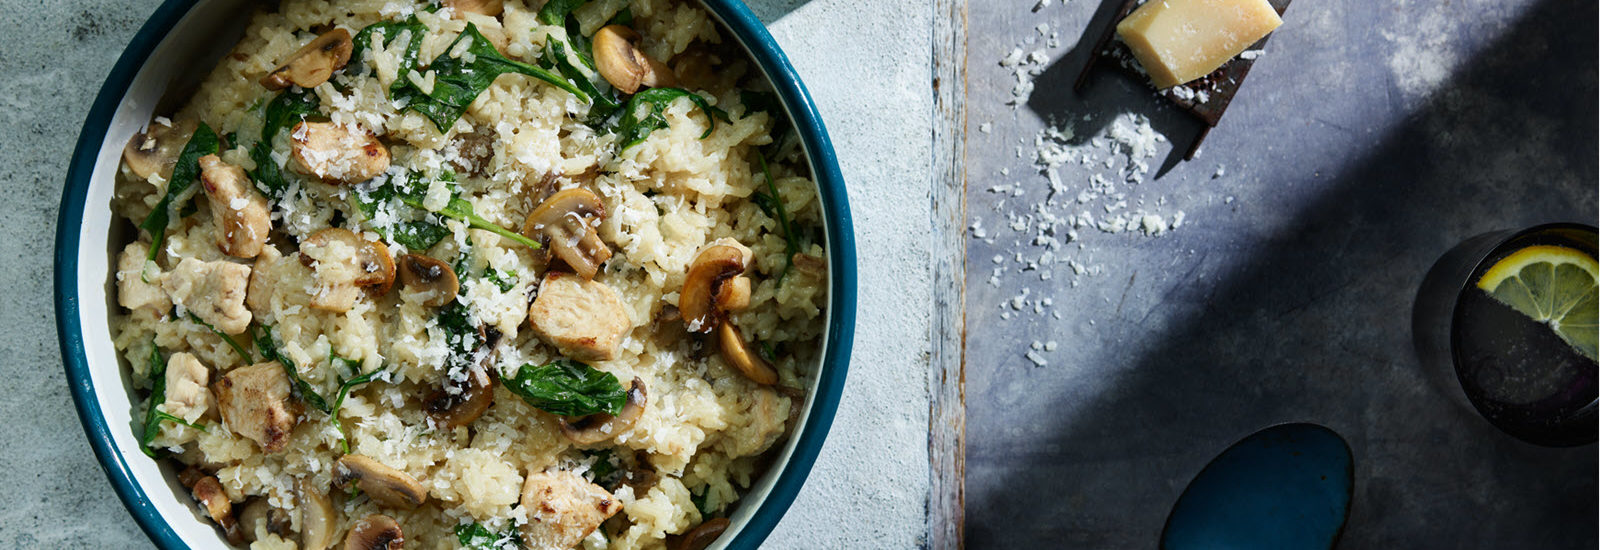 Baked Chicken and Mushroom Risotto